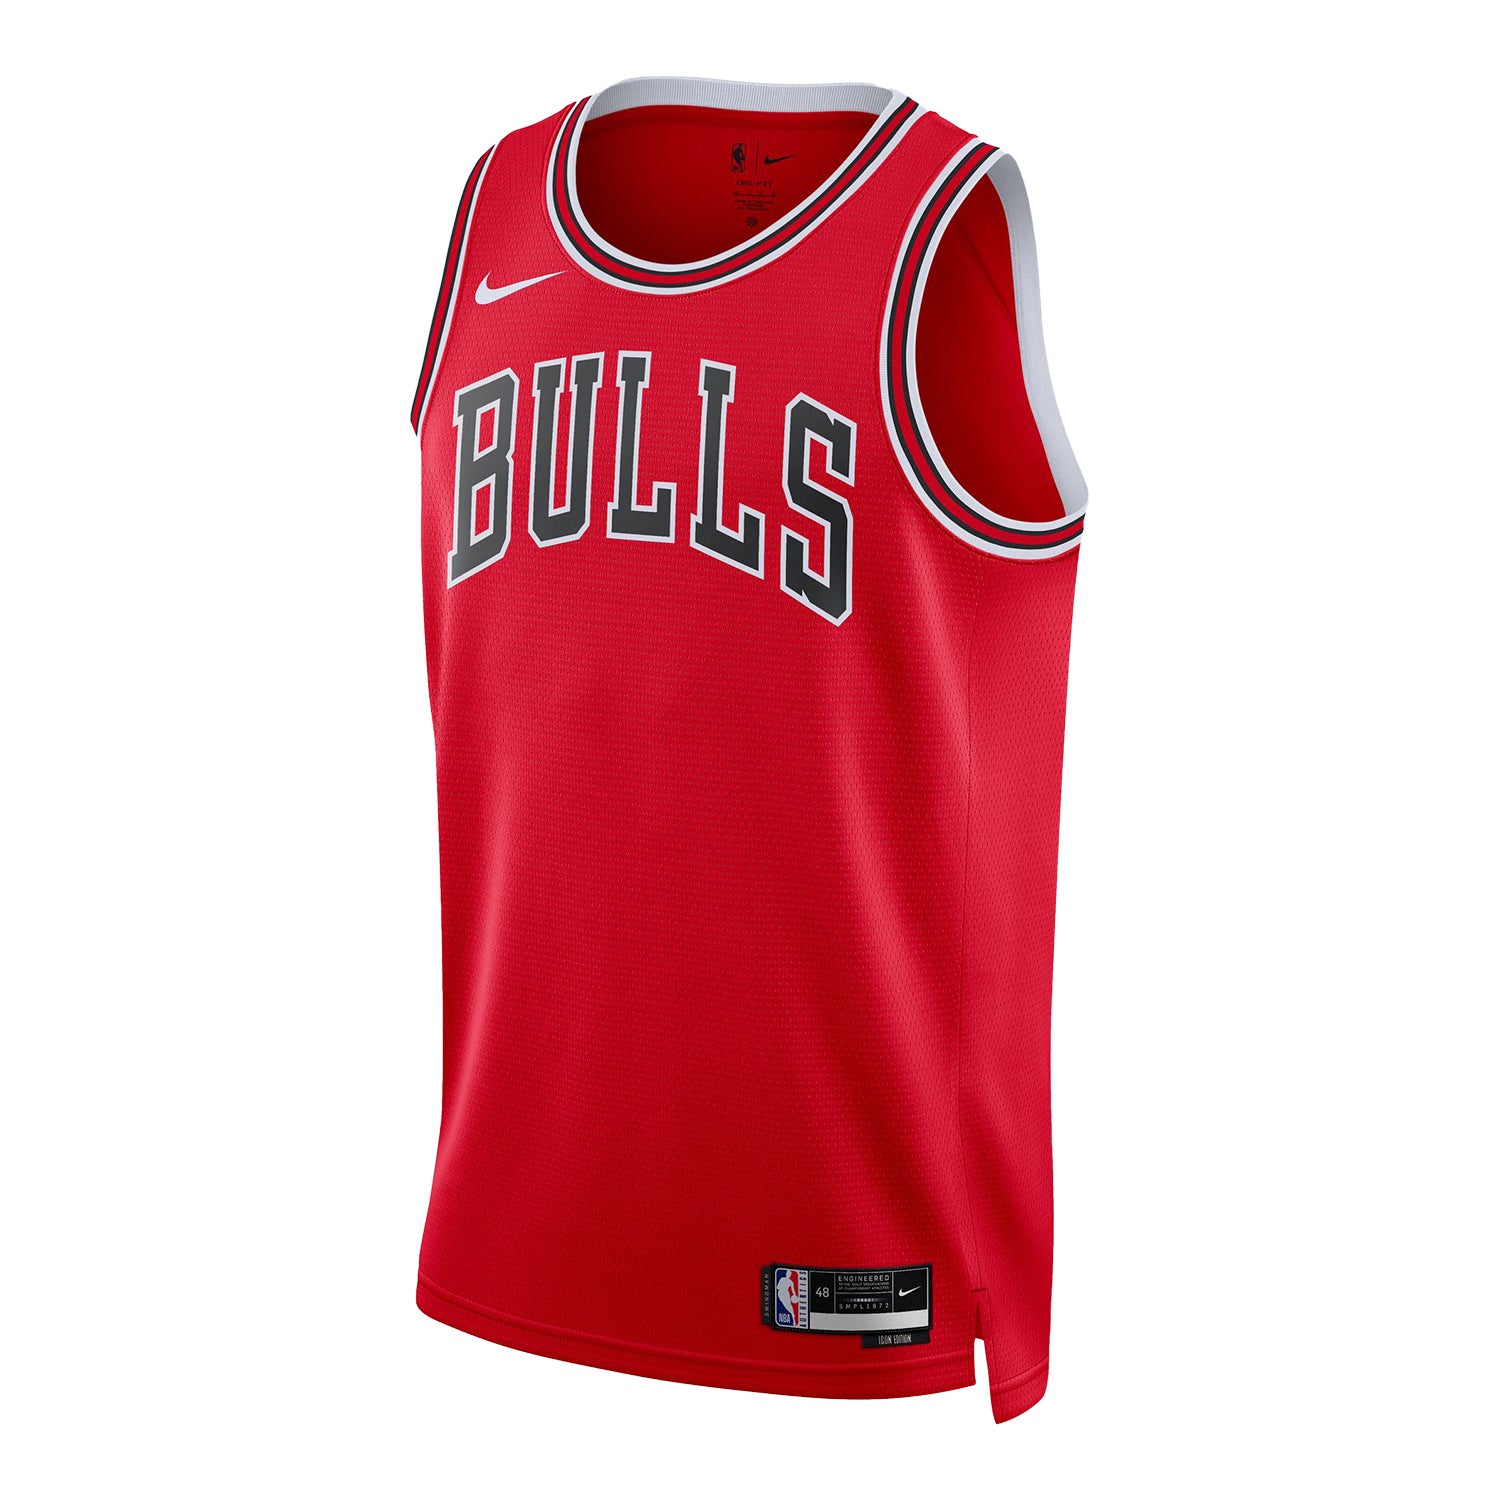 Chicago Bulls on X: Chicago is OUR CITY. City Edition jerseys are here!   / X